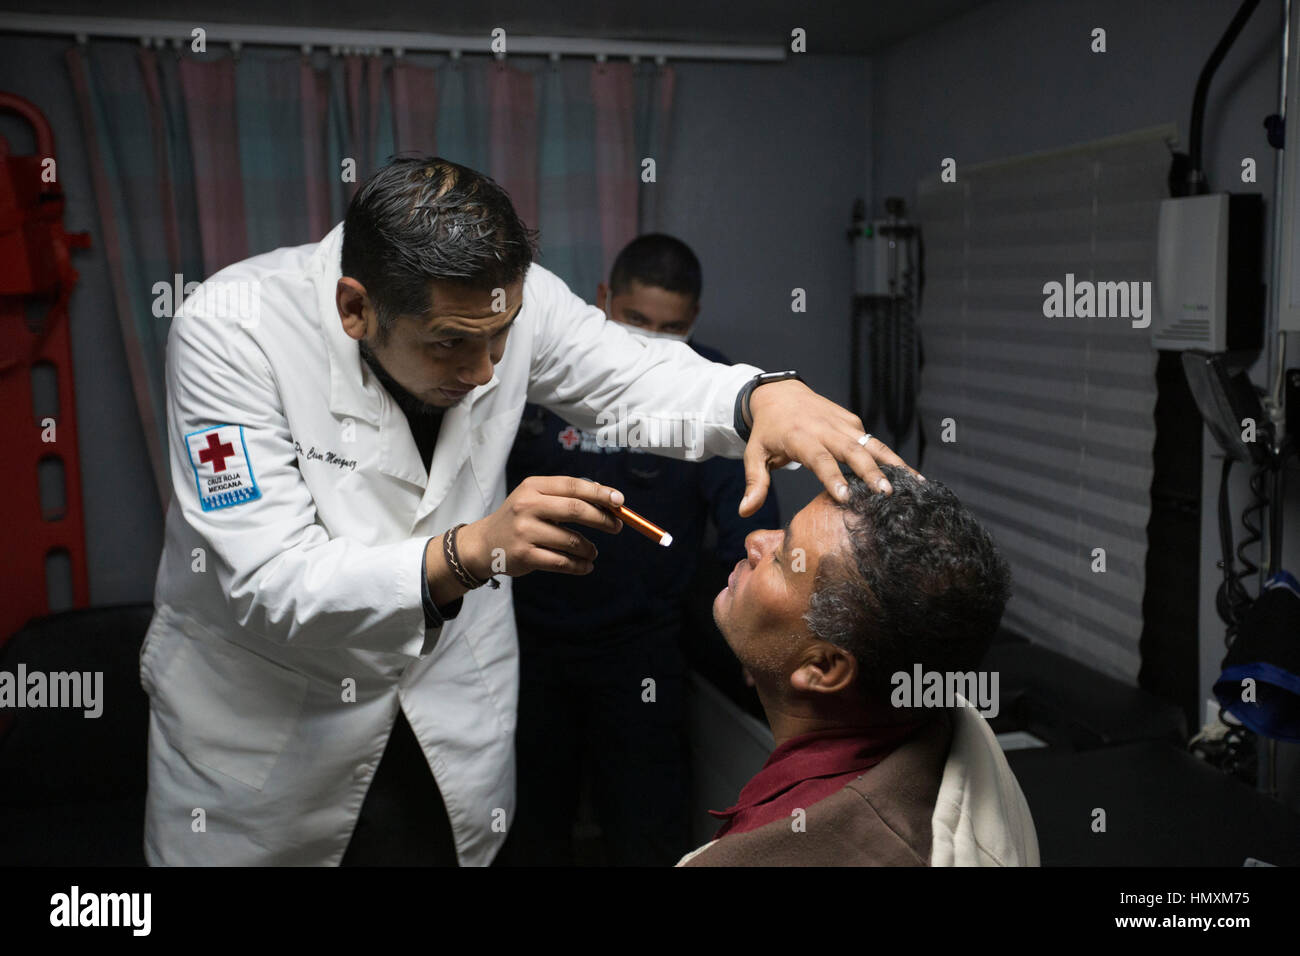 Tijuana, Mexico. 6th Feb, 2017. An International Red Cross doctor checks a Honduran migrant before his entrance to a shelter in Tijuana, Mexico, on Feb. 6, 2017. U.S. President Donald Trump signed two executive orders on Jan. 25 to have the Department of Homeland Security begin planning, designing and building a 'physical barrier' along the U.S.-Mexico border, identify undocumented immigrants, and remove those who have criminal records. Credit: David de la Paz/Xinhua/Alamy Live News Stock Photo